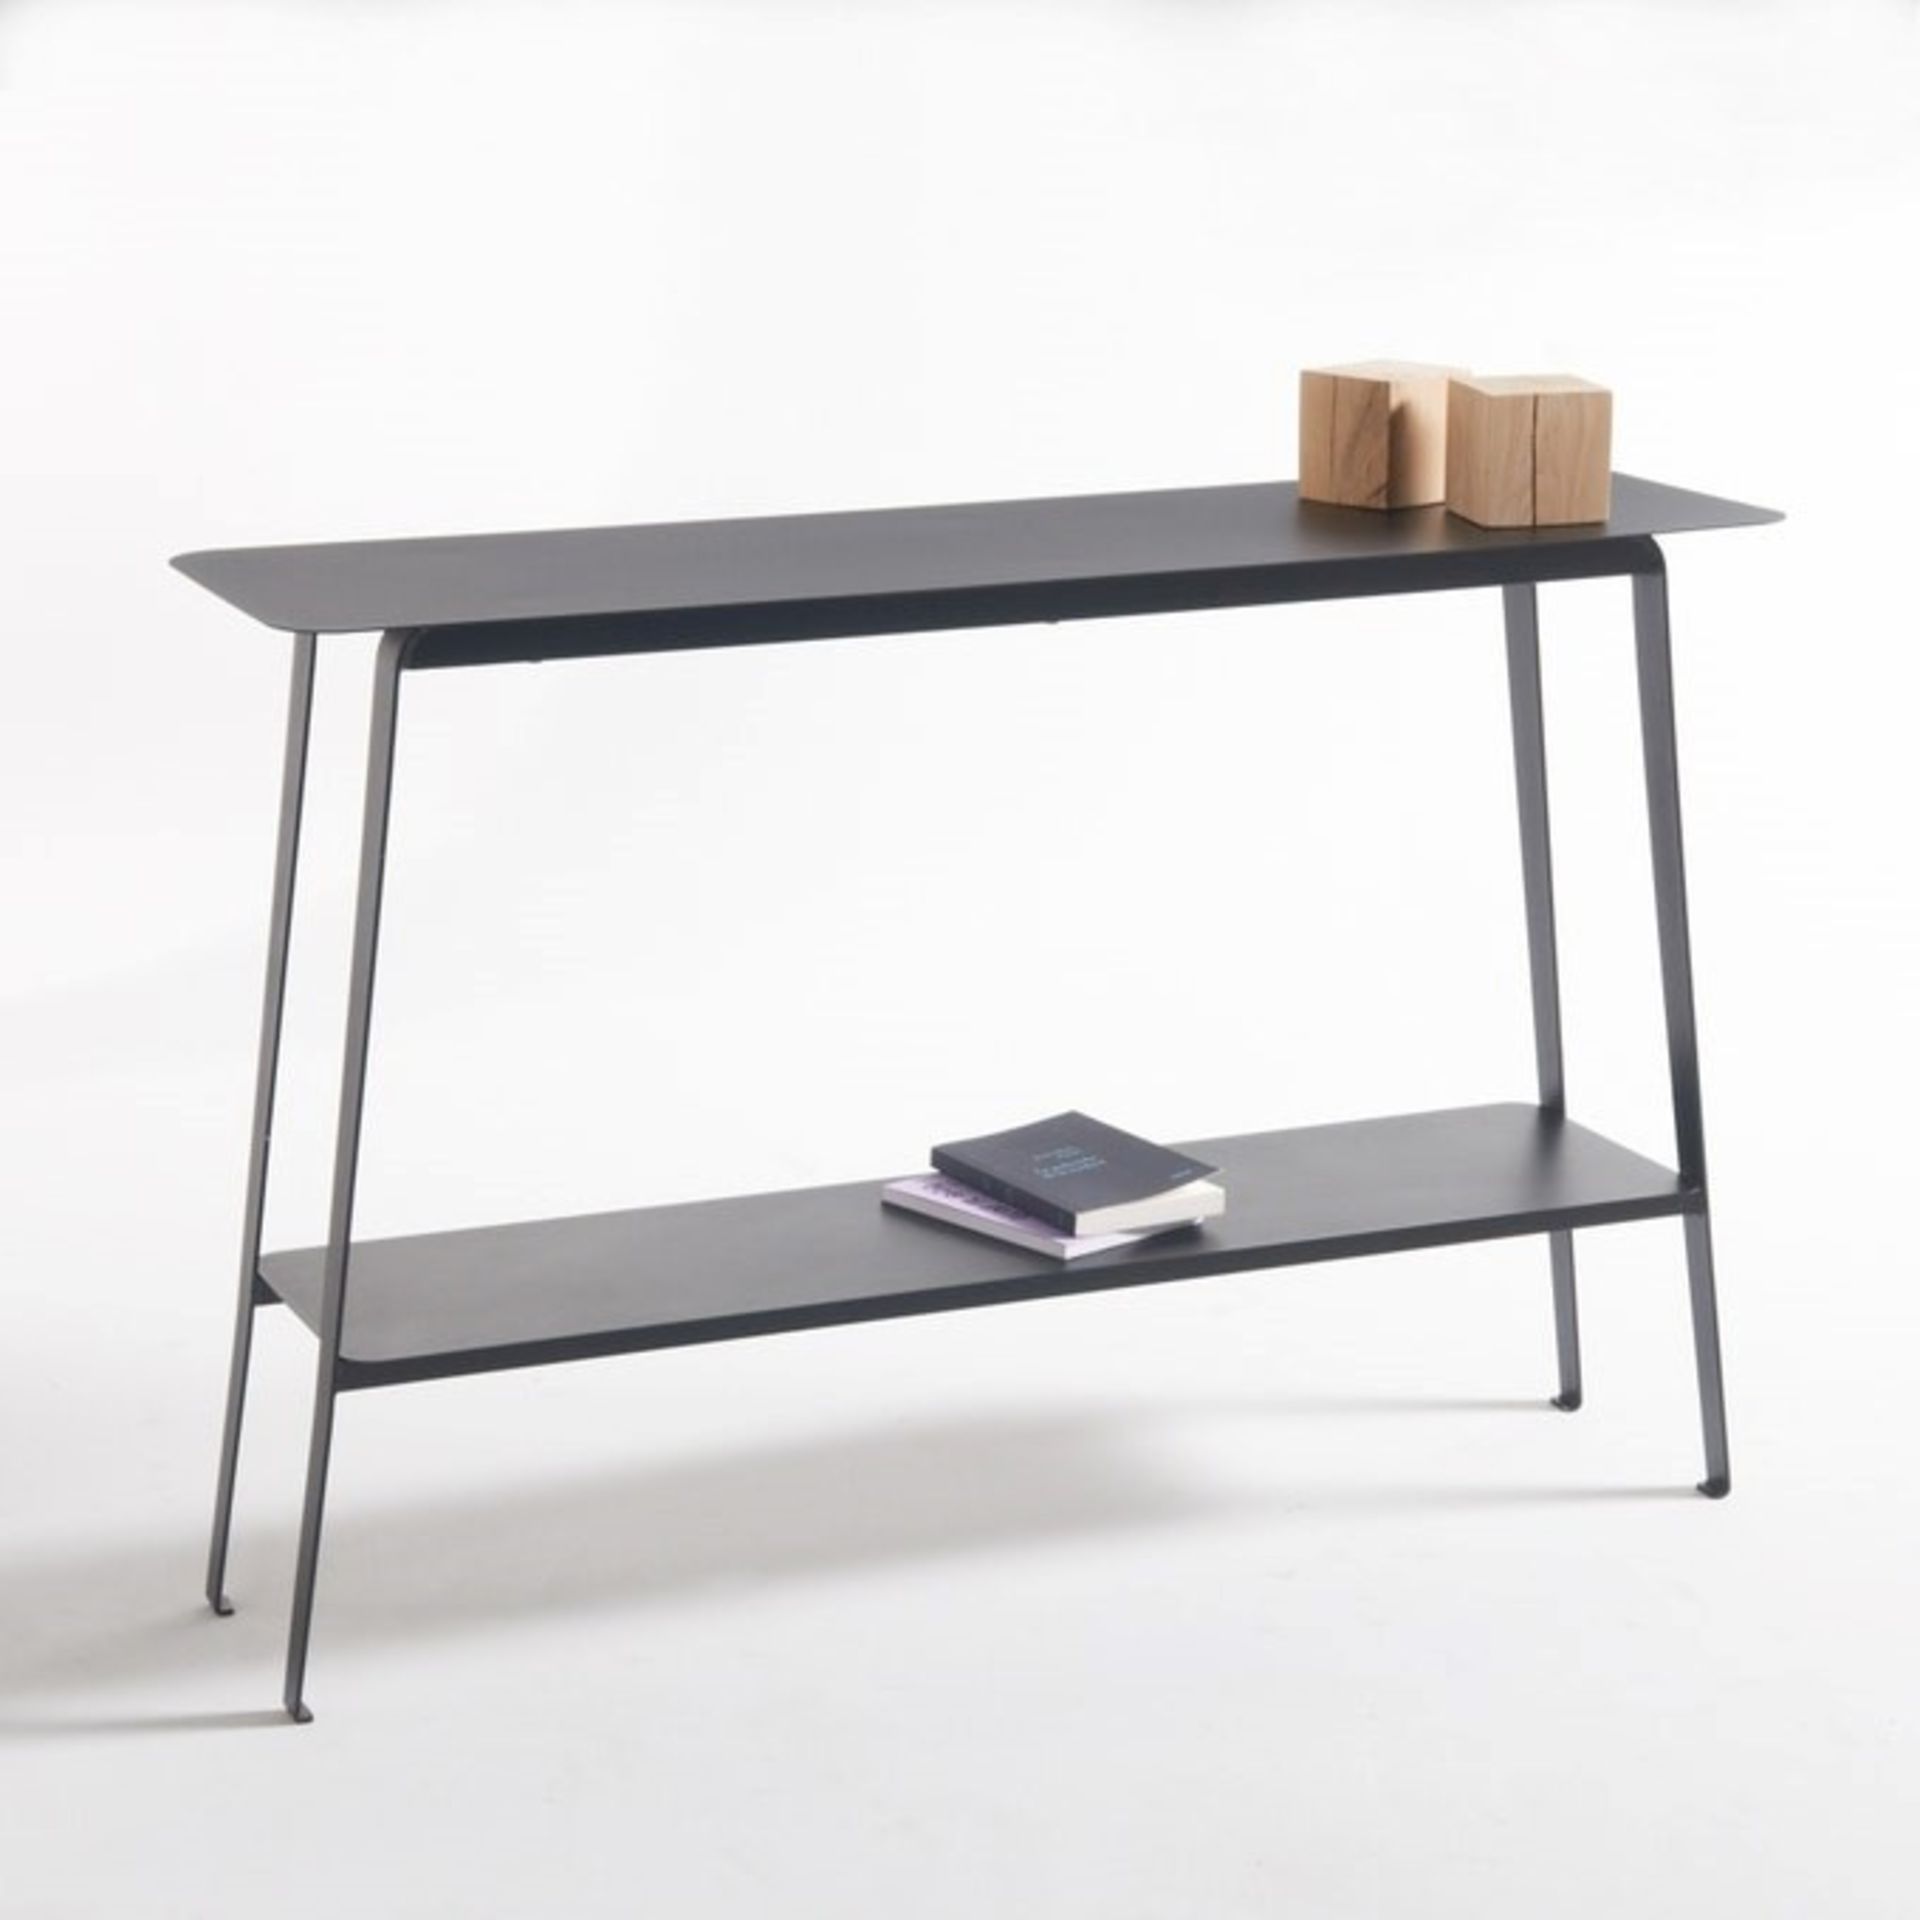 1 GRADE B BOXED HIBA STEEL CONSOLE TABLE IN BLACK / RRP £185.00 (PUBLIC VIEWING AVAILABLE)